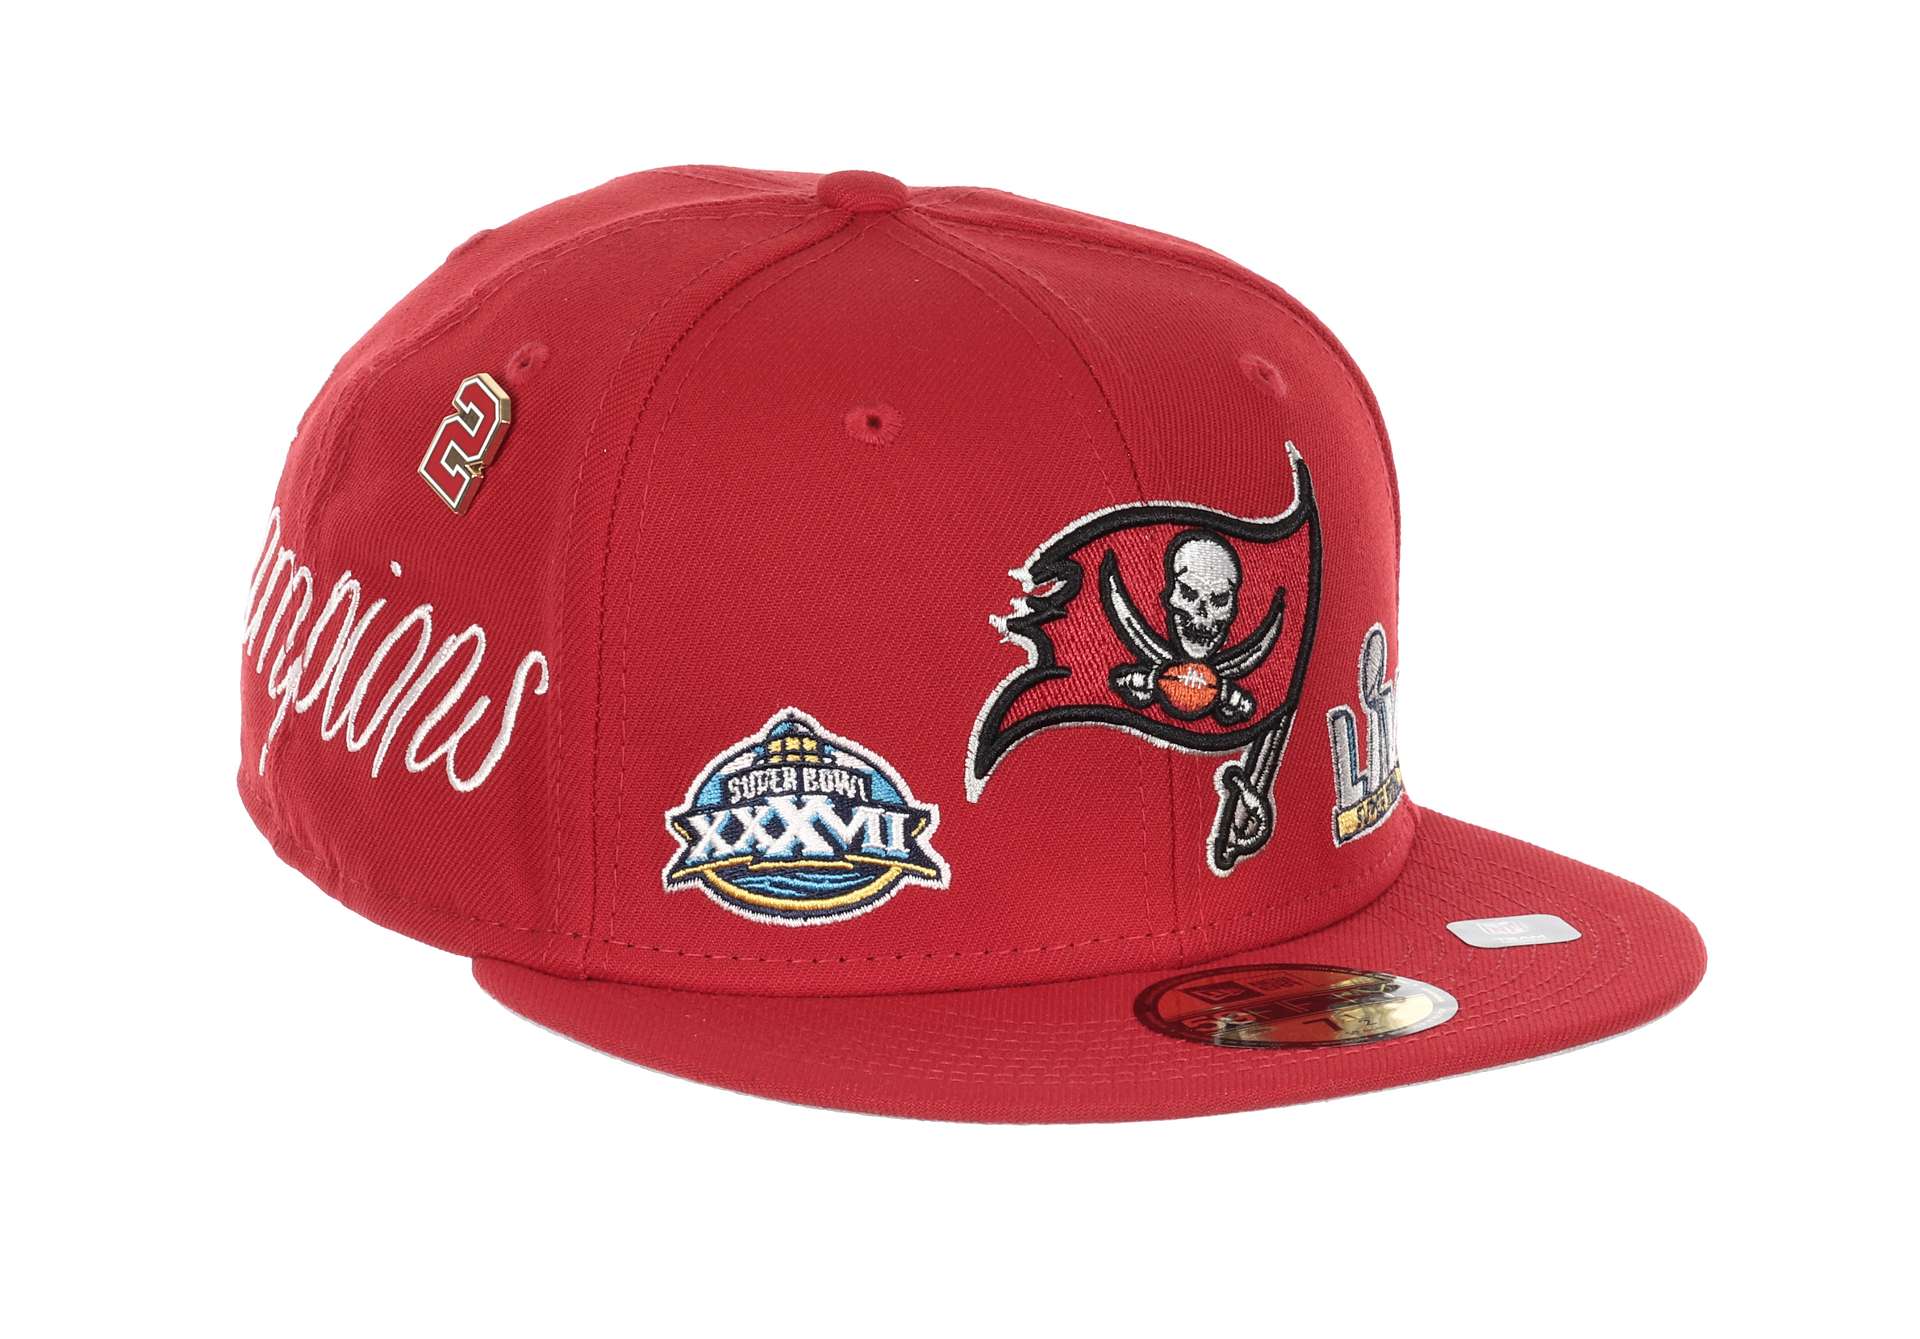 Tampa Bay Buccaneers Historic Champ Red 59Fifty Basecap New Era